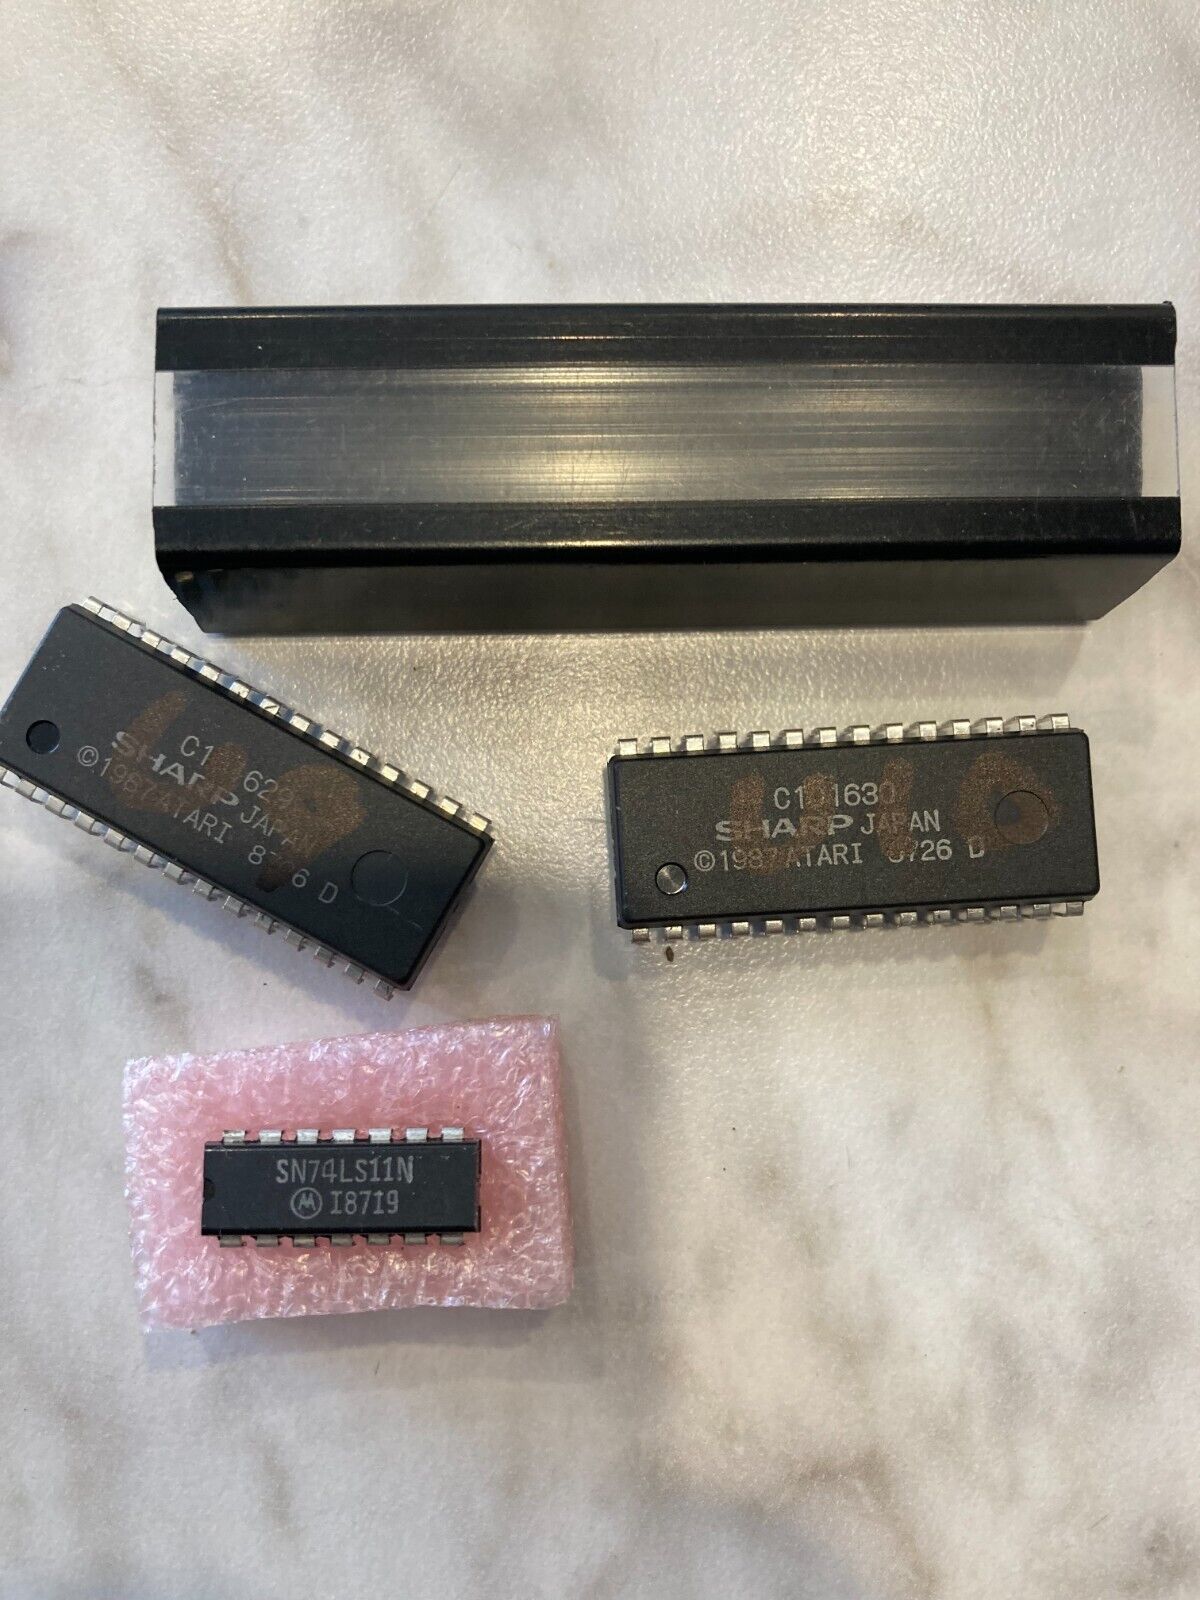 Atari C101629 and C101630 chips plus one more UNTESTED